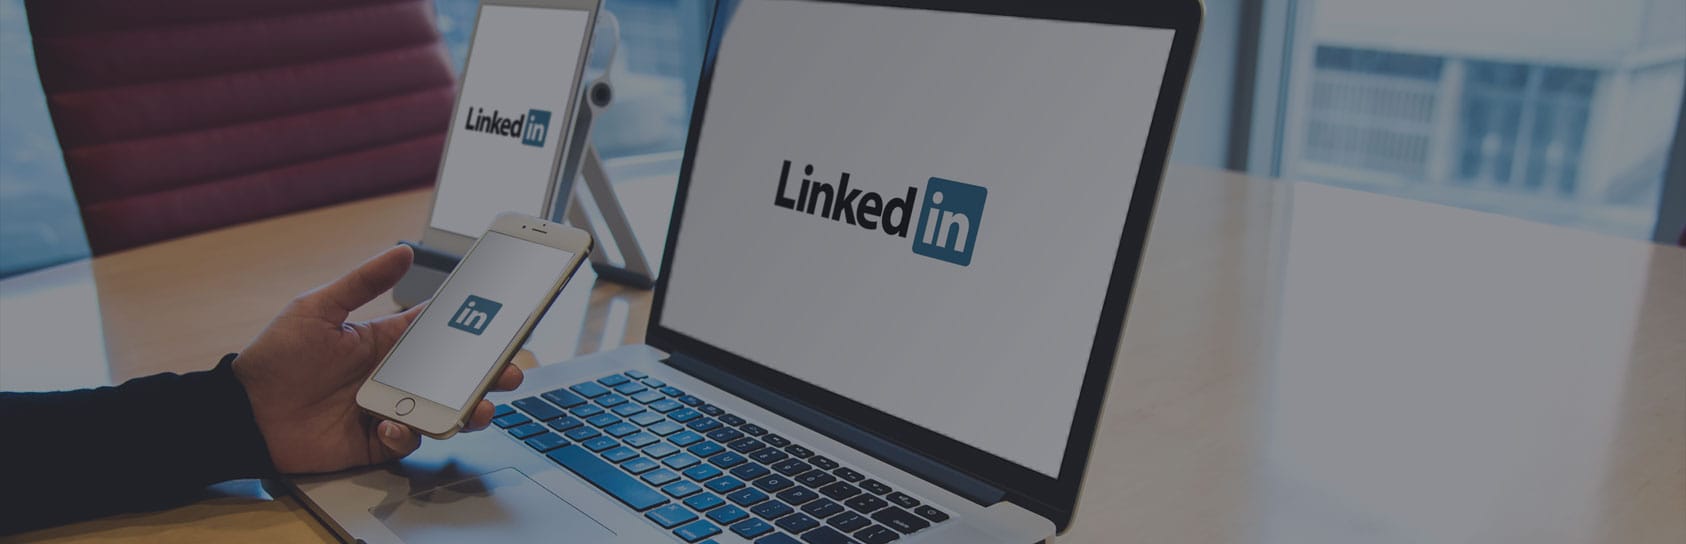 advantages of using Linkedin for business